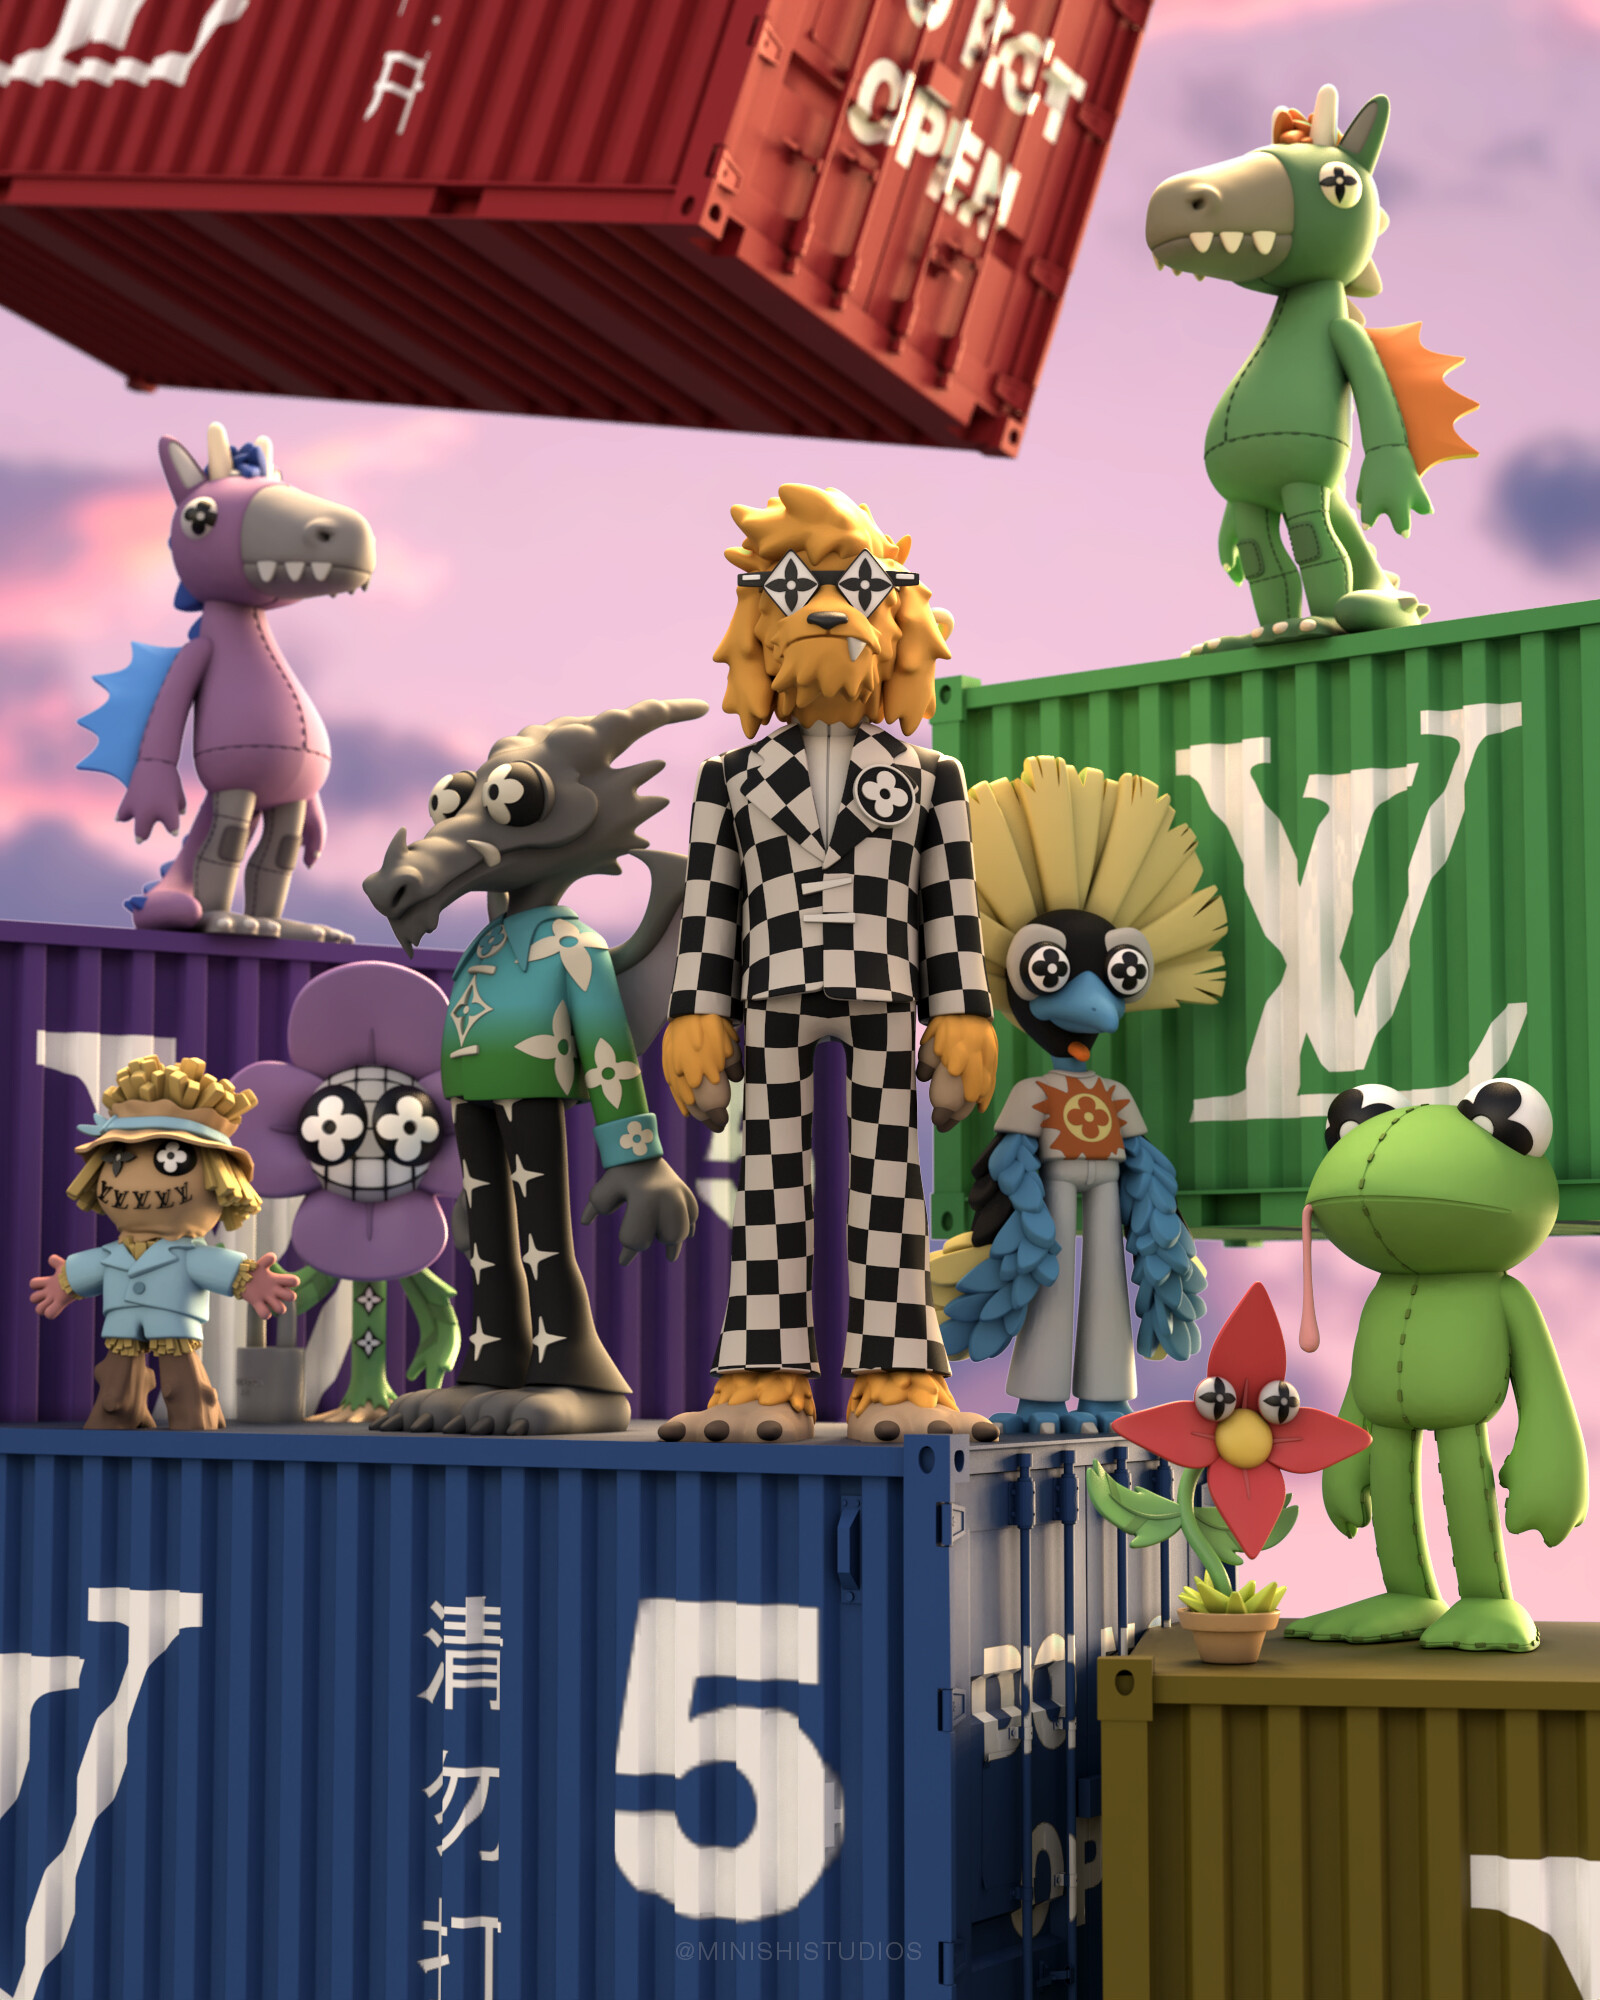 2/9. I made a 3D sculpt based on Virgil Abloh's Zoooom with Friends  characters for Louis Vuitton. I hope you like it! : r/alternativeart